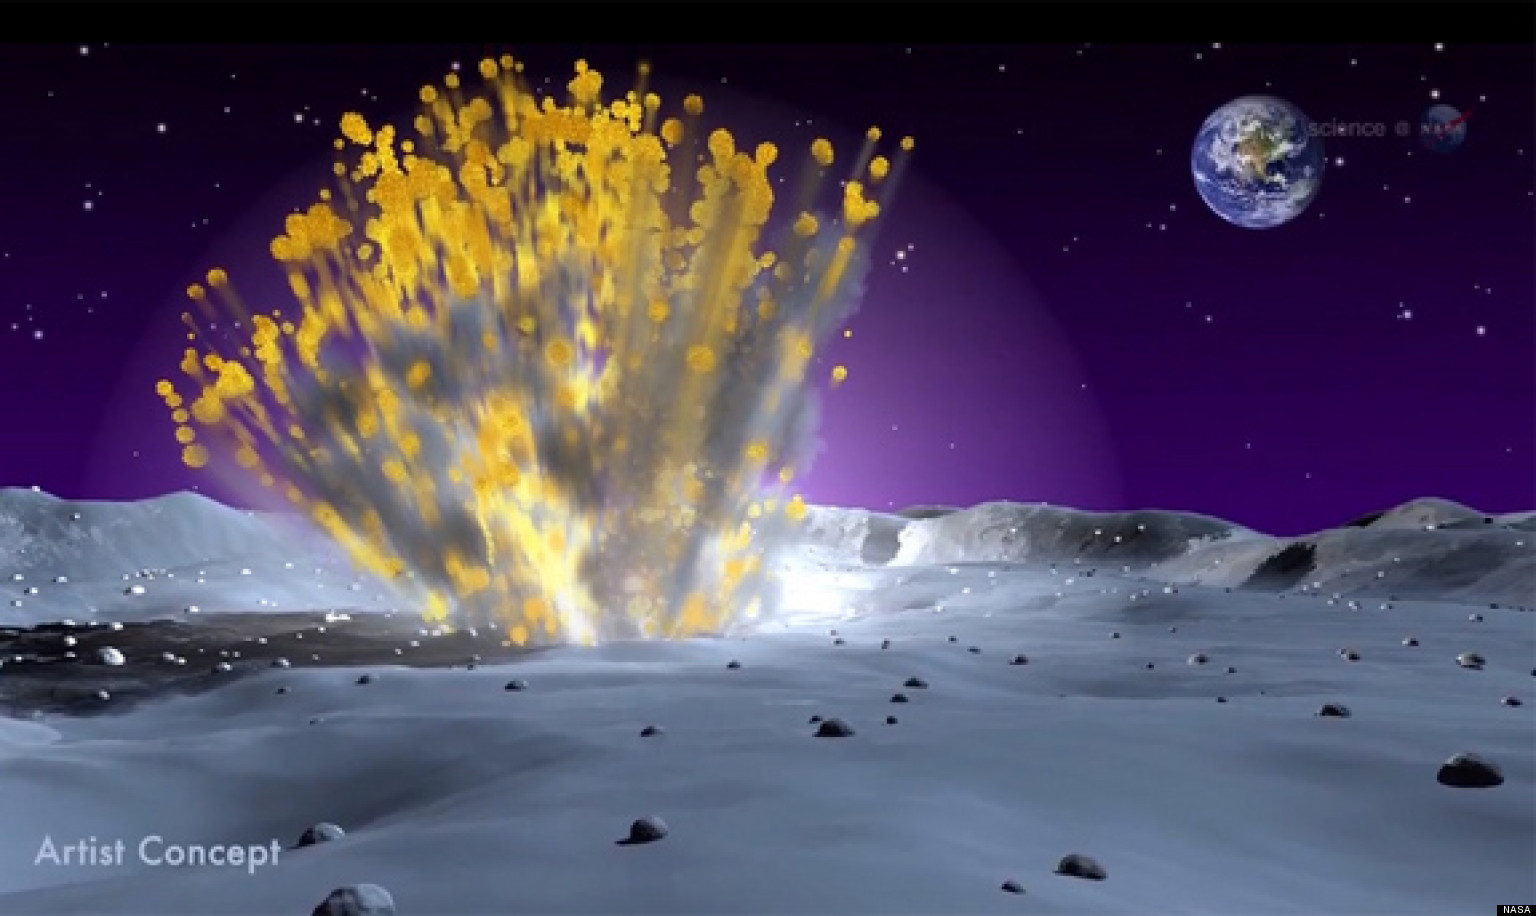 Moon Explosion Sparked By Meteorite Crash On Lunar Surface, NASA Says